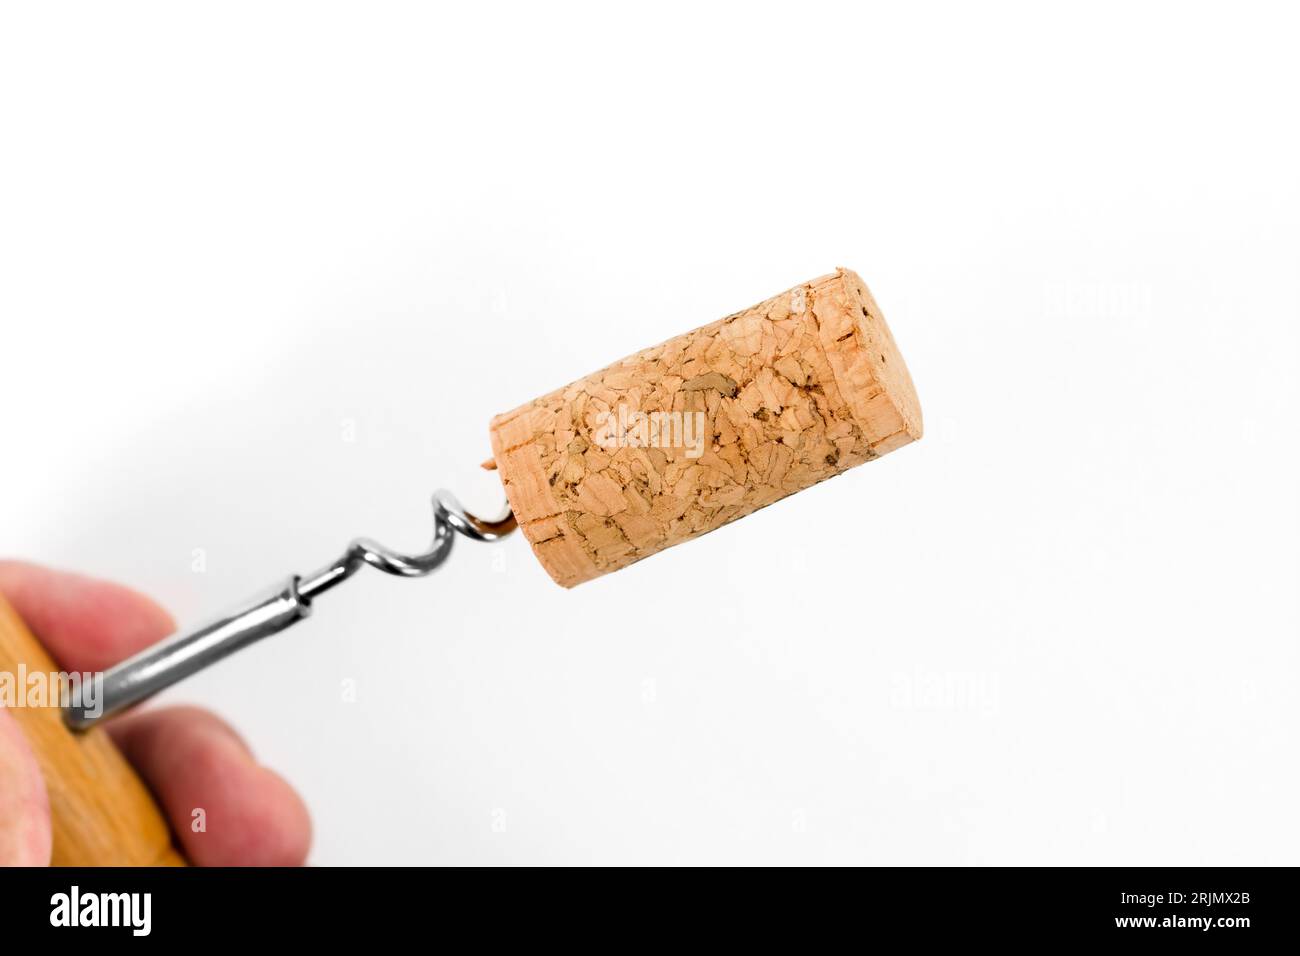 Alcoholism or adulterated wine concept. Wine cork on corkscrew. Stock Photo